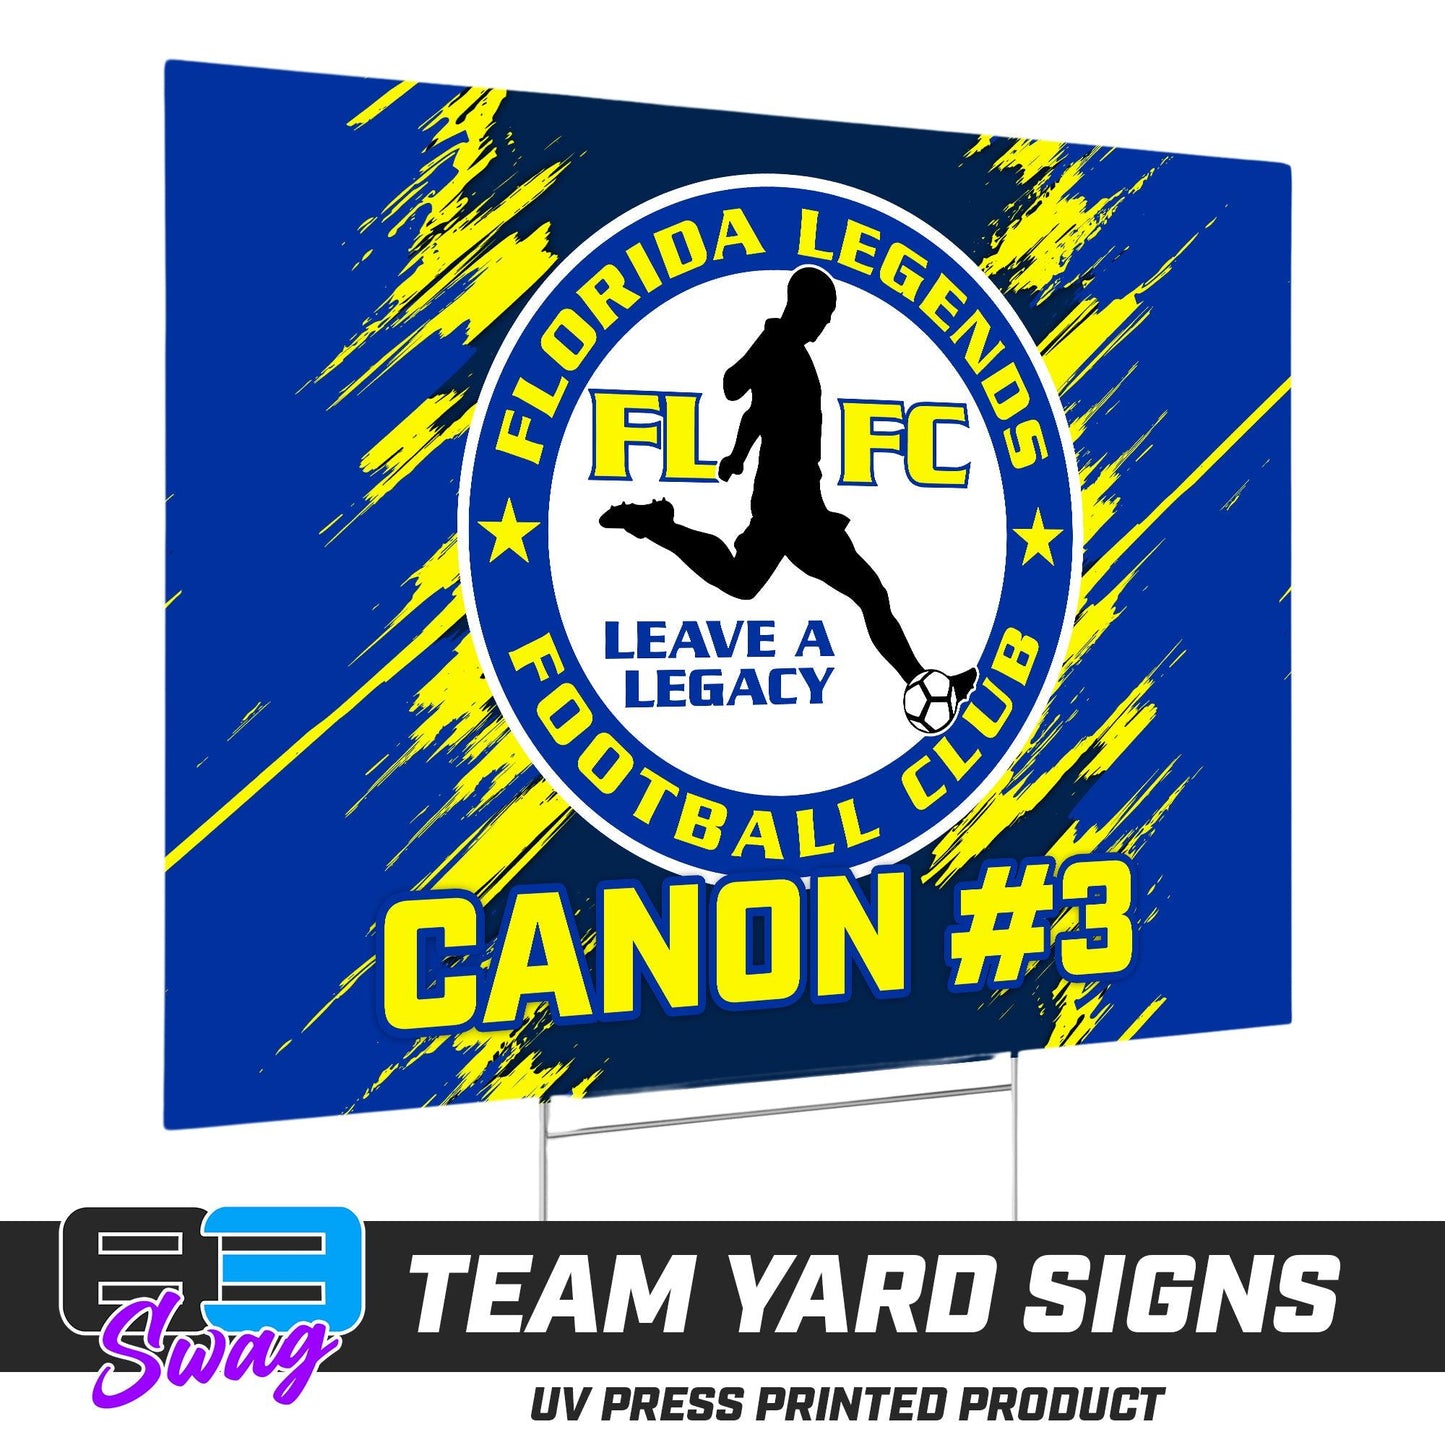 (12 Pack) - 18"x24" Yard Signs w/Stakes - Florida Legends FC - 83Swag